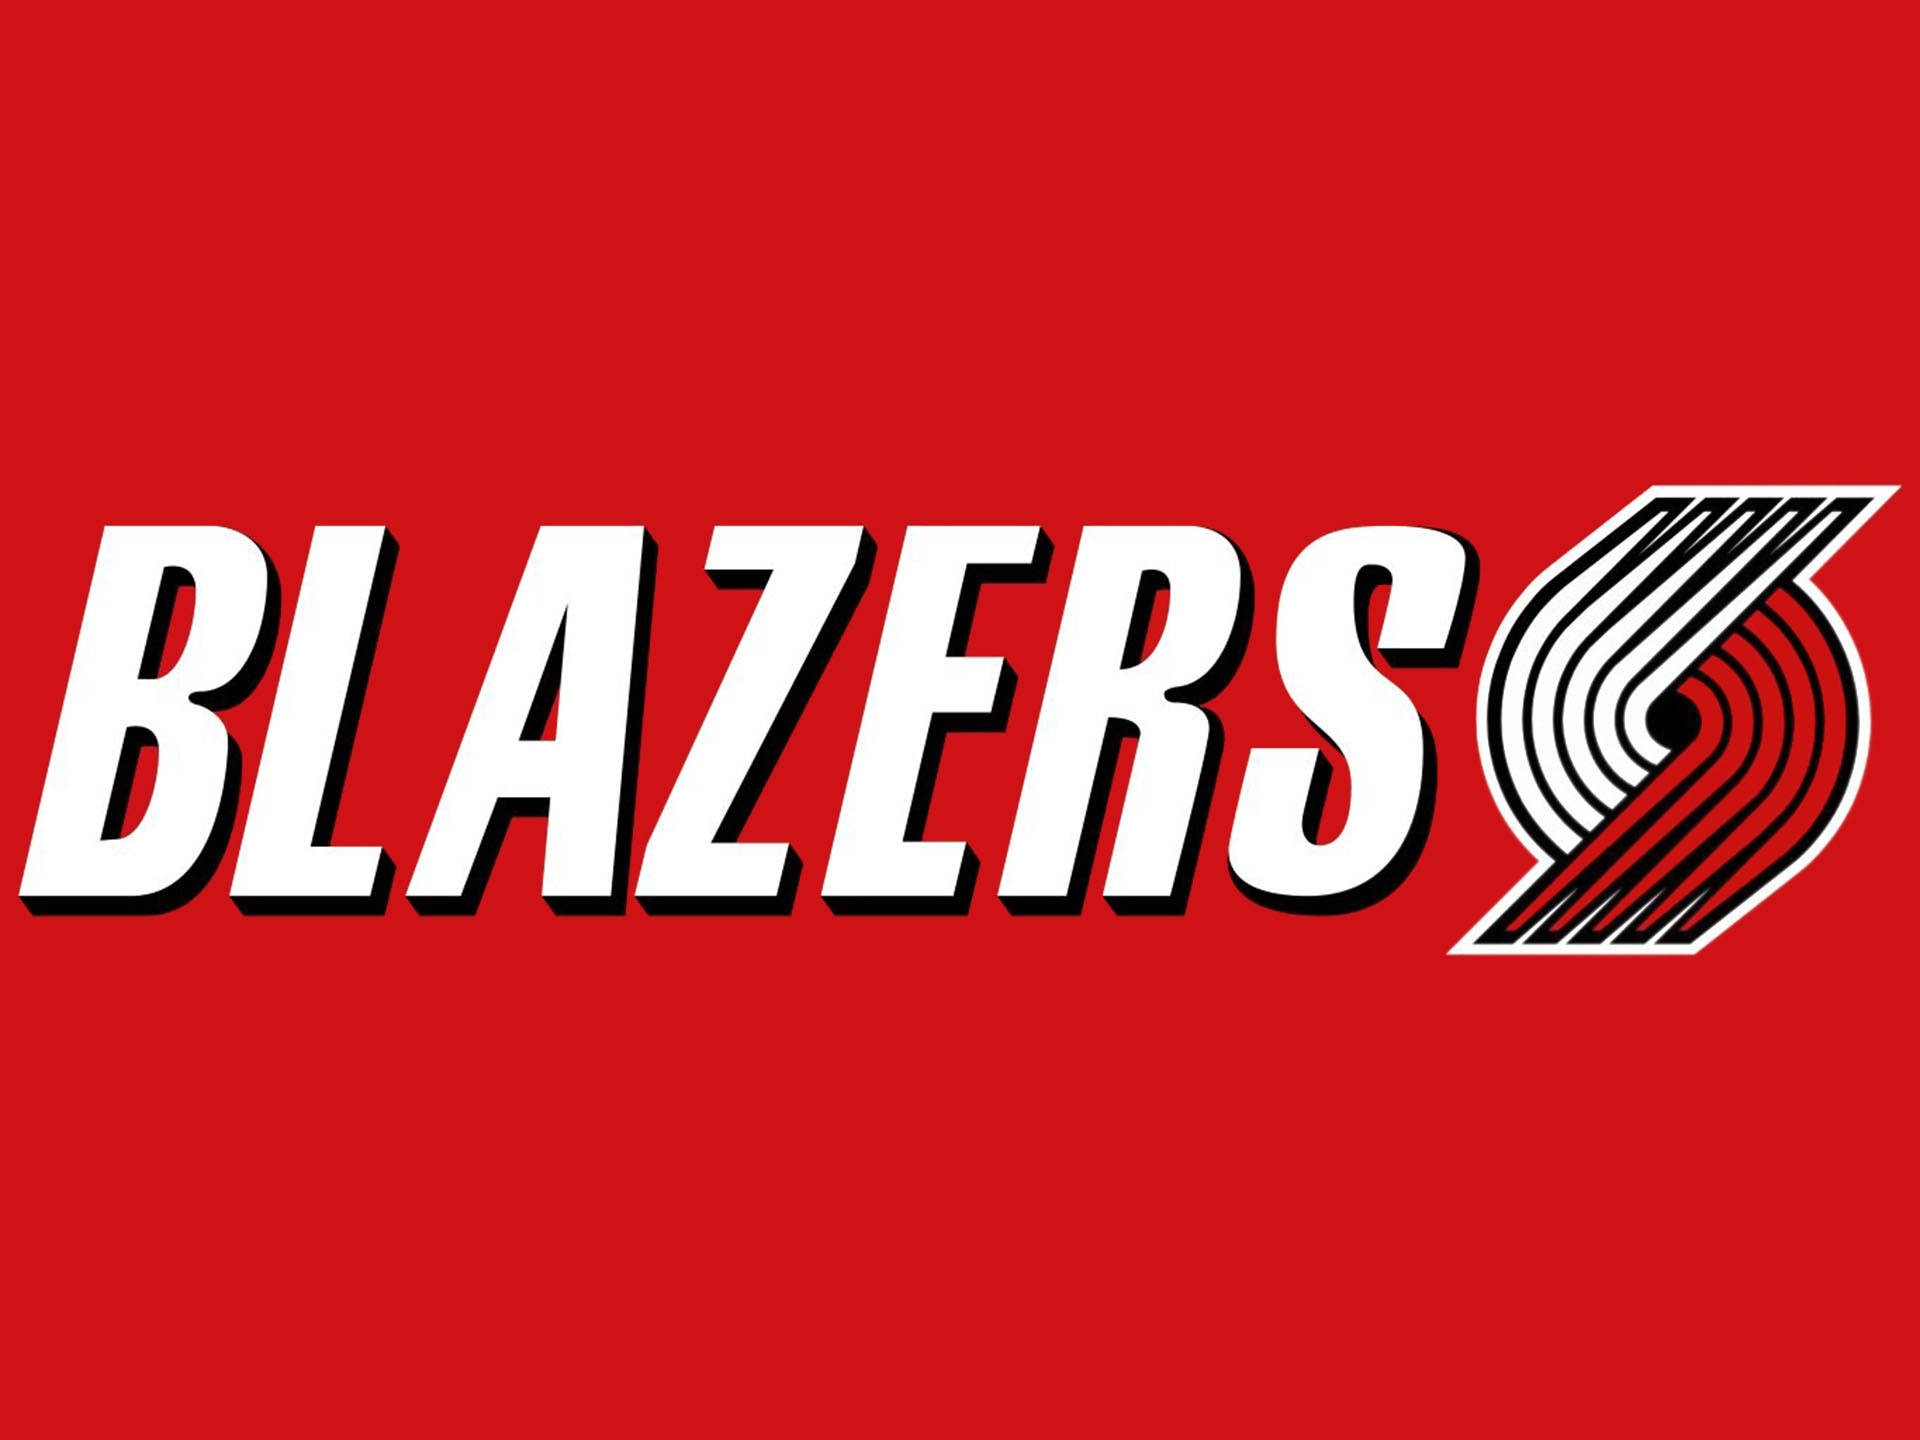 The noble logo of the Portland Trail Blazers team on a dynamic background in red. Wallpaper